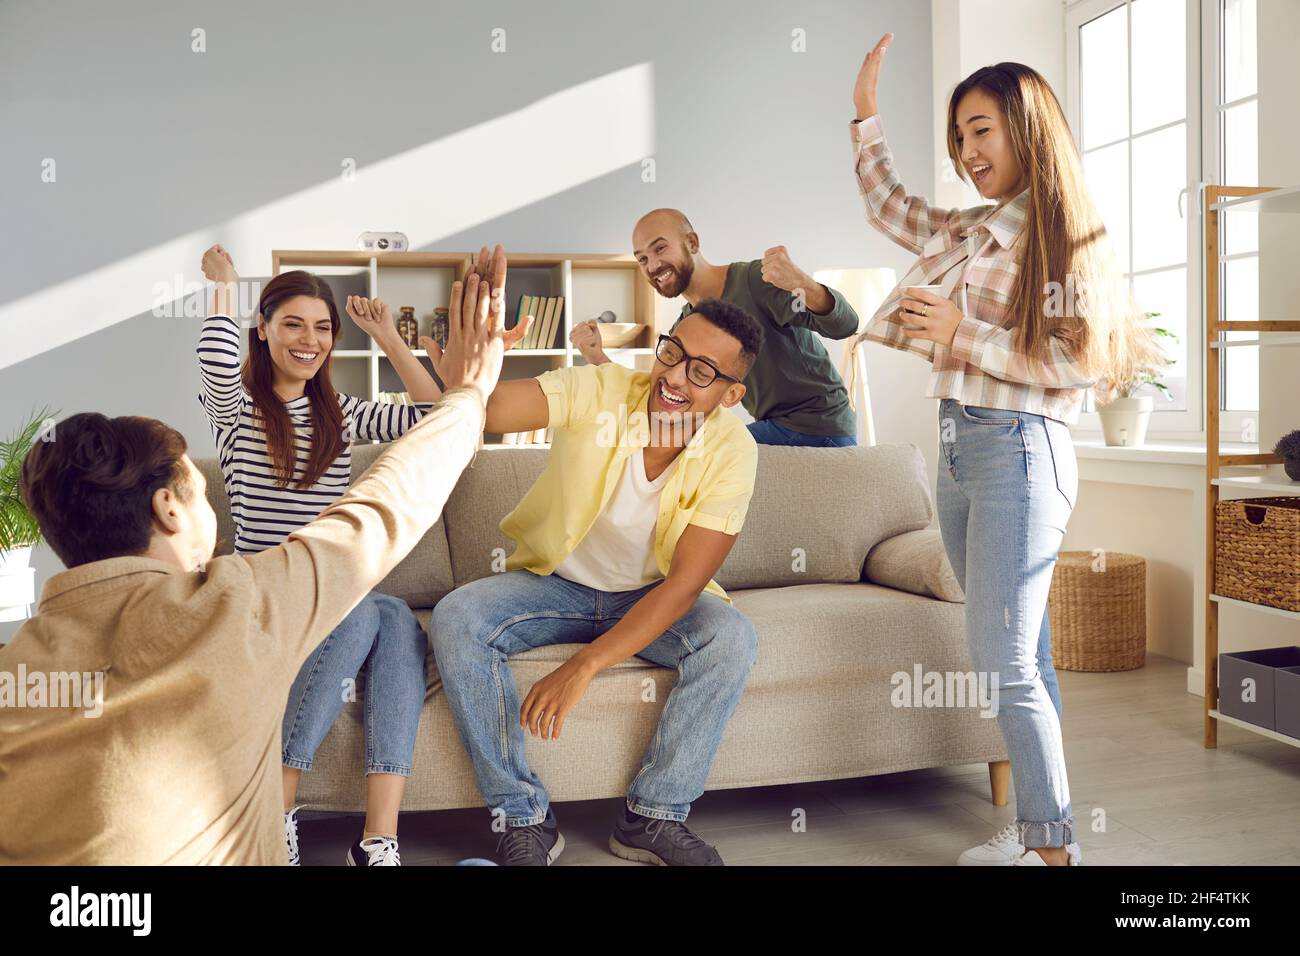 Two cheerful multiracial men give high five to each other while having fun at home with friends. Stock Photo